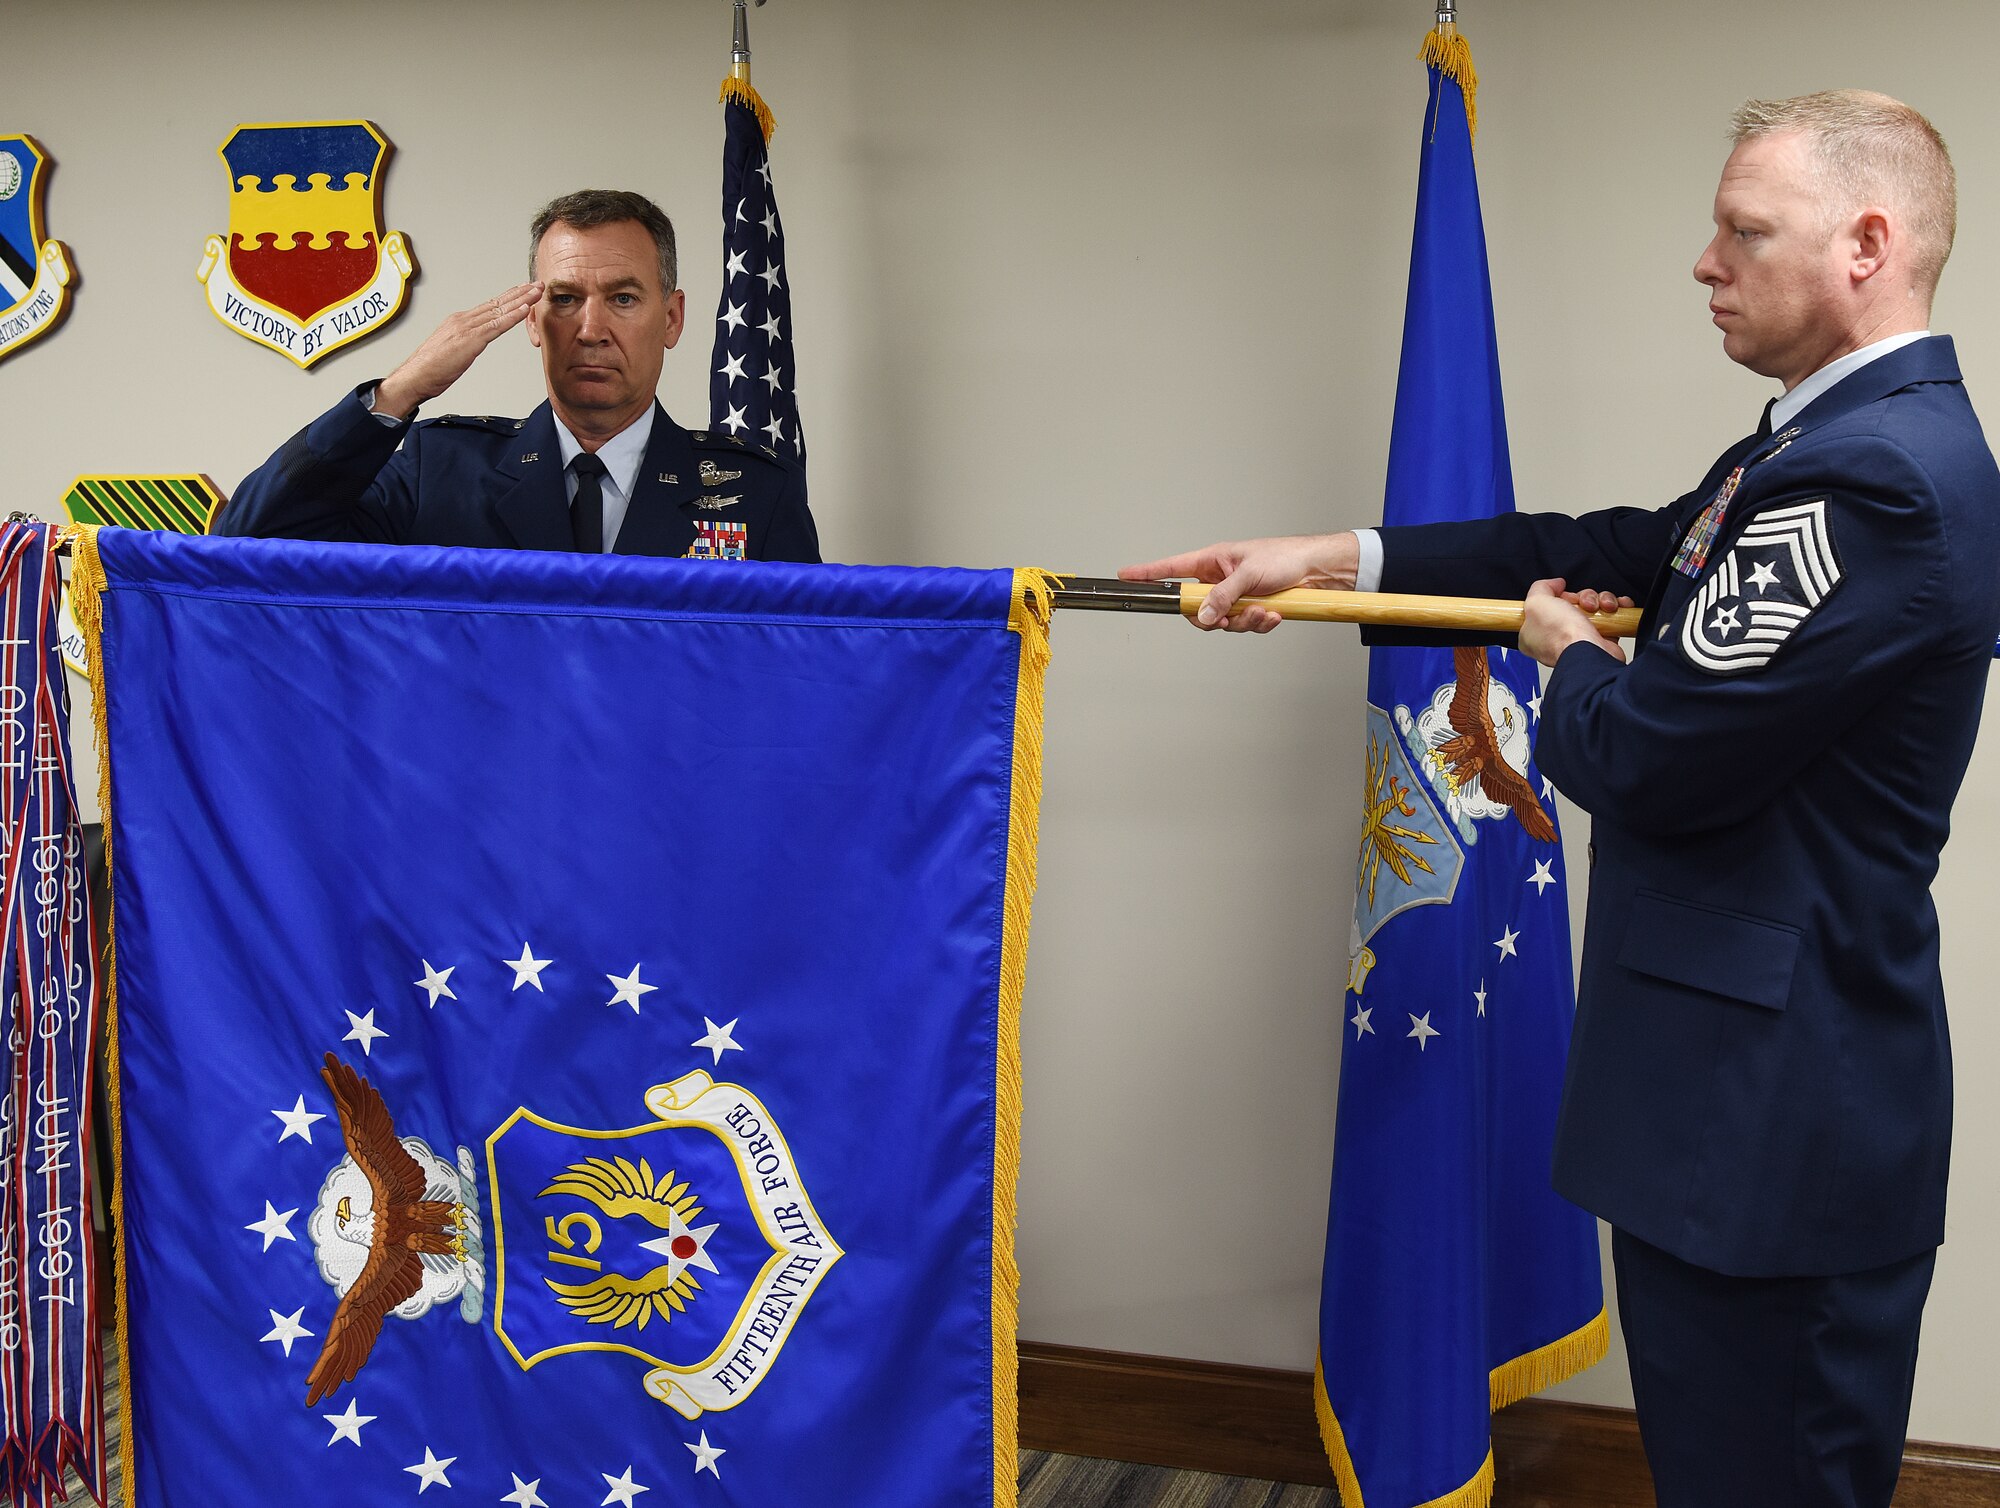 Major General Chad Franks assumes command of the 15th Air Force